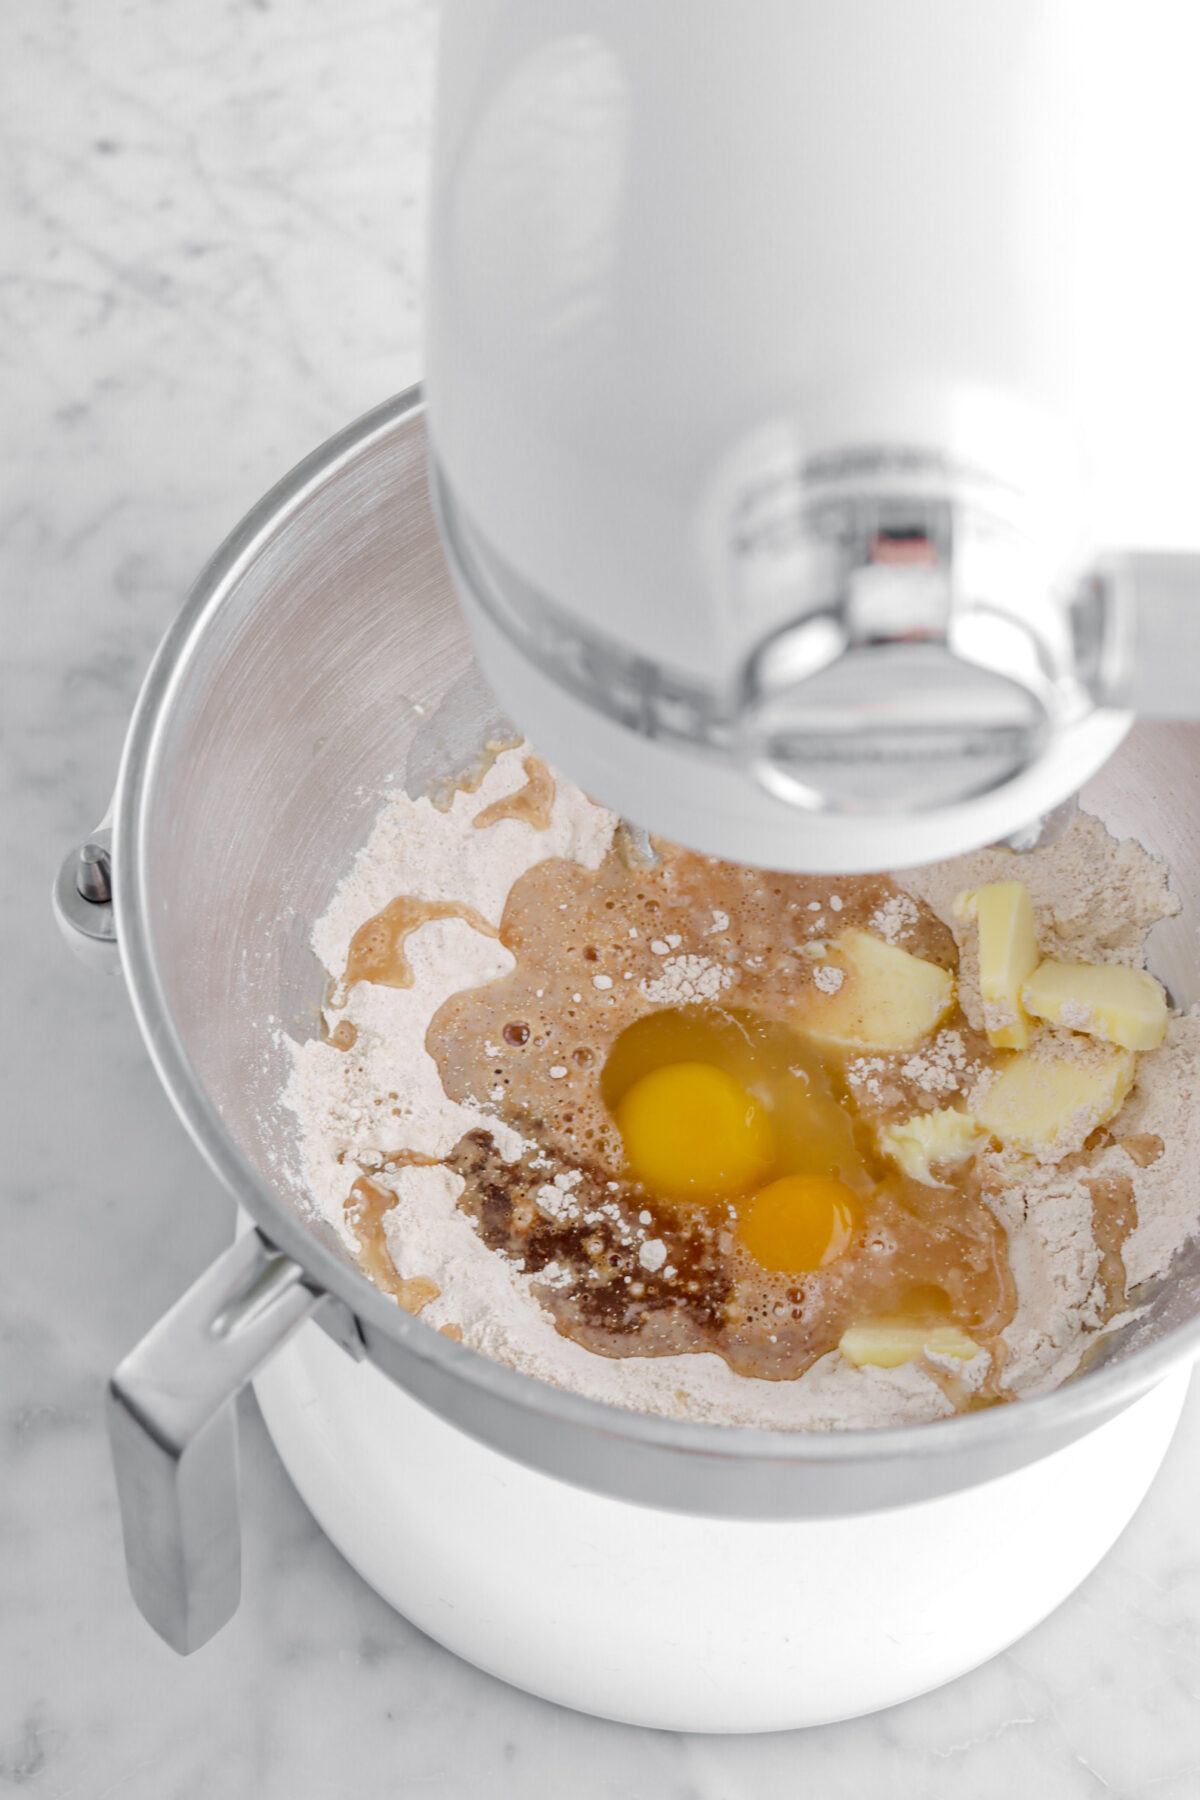 eggs, butter, vanilla, and apple cider added to dry ingredients.